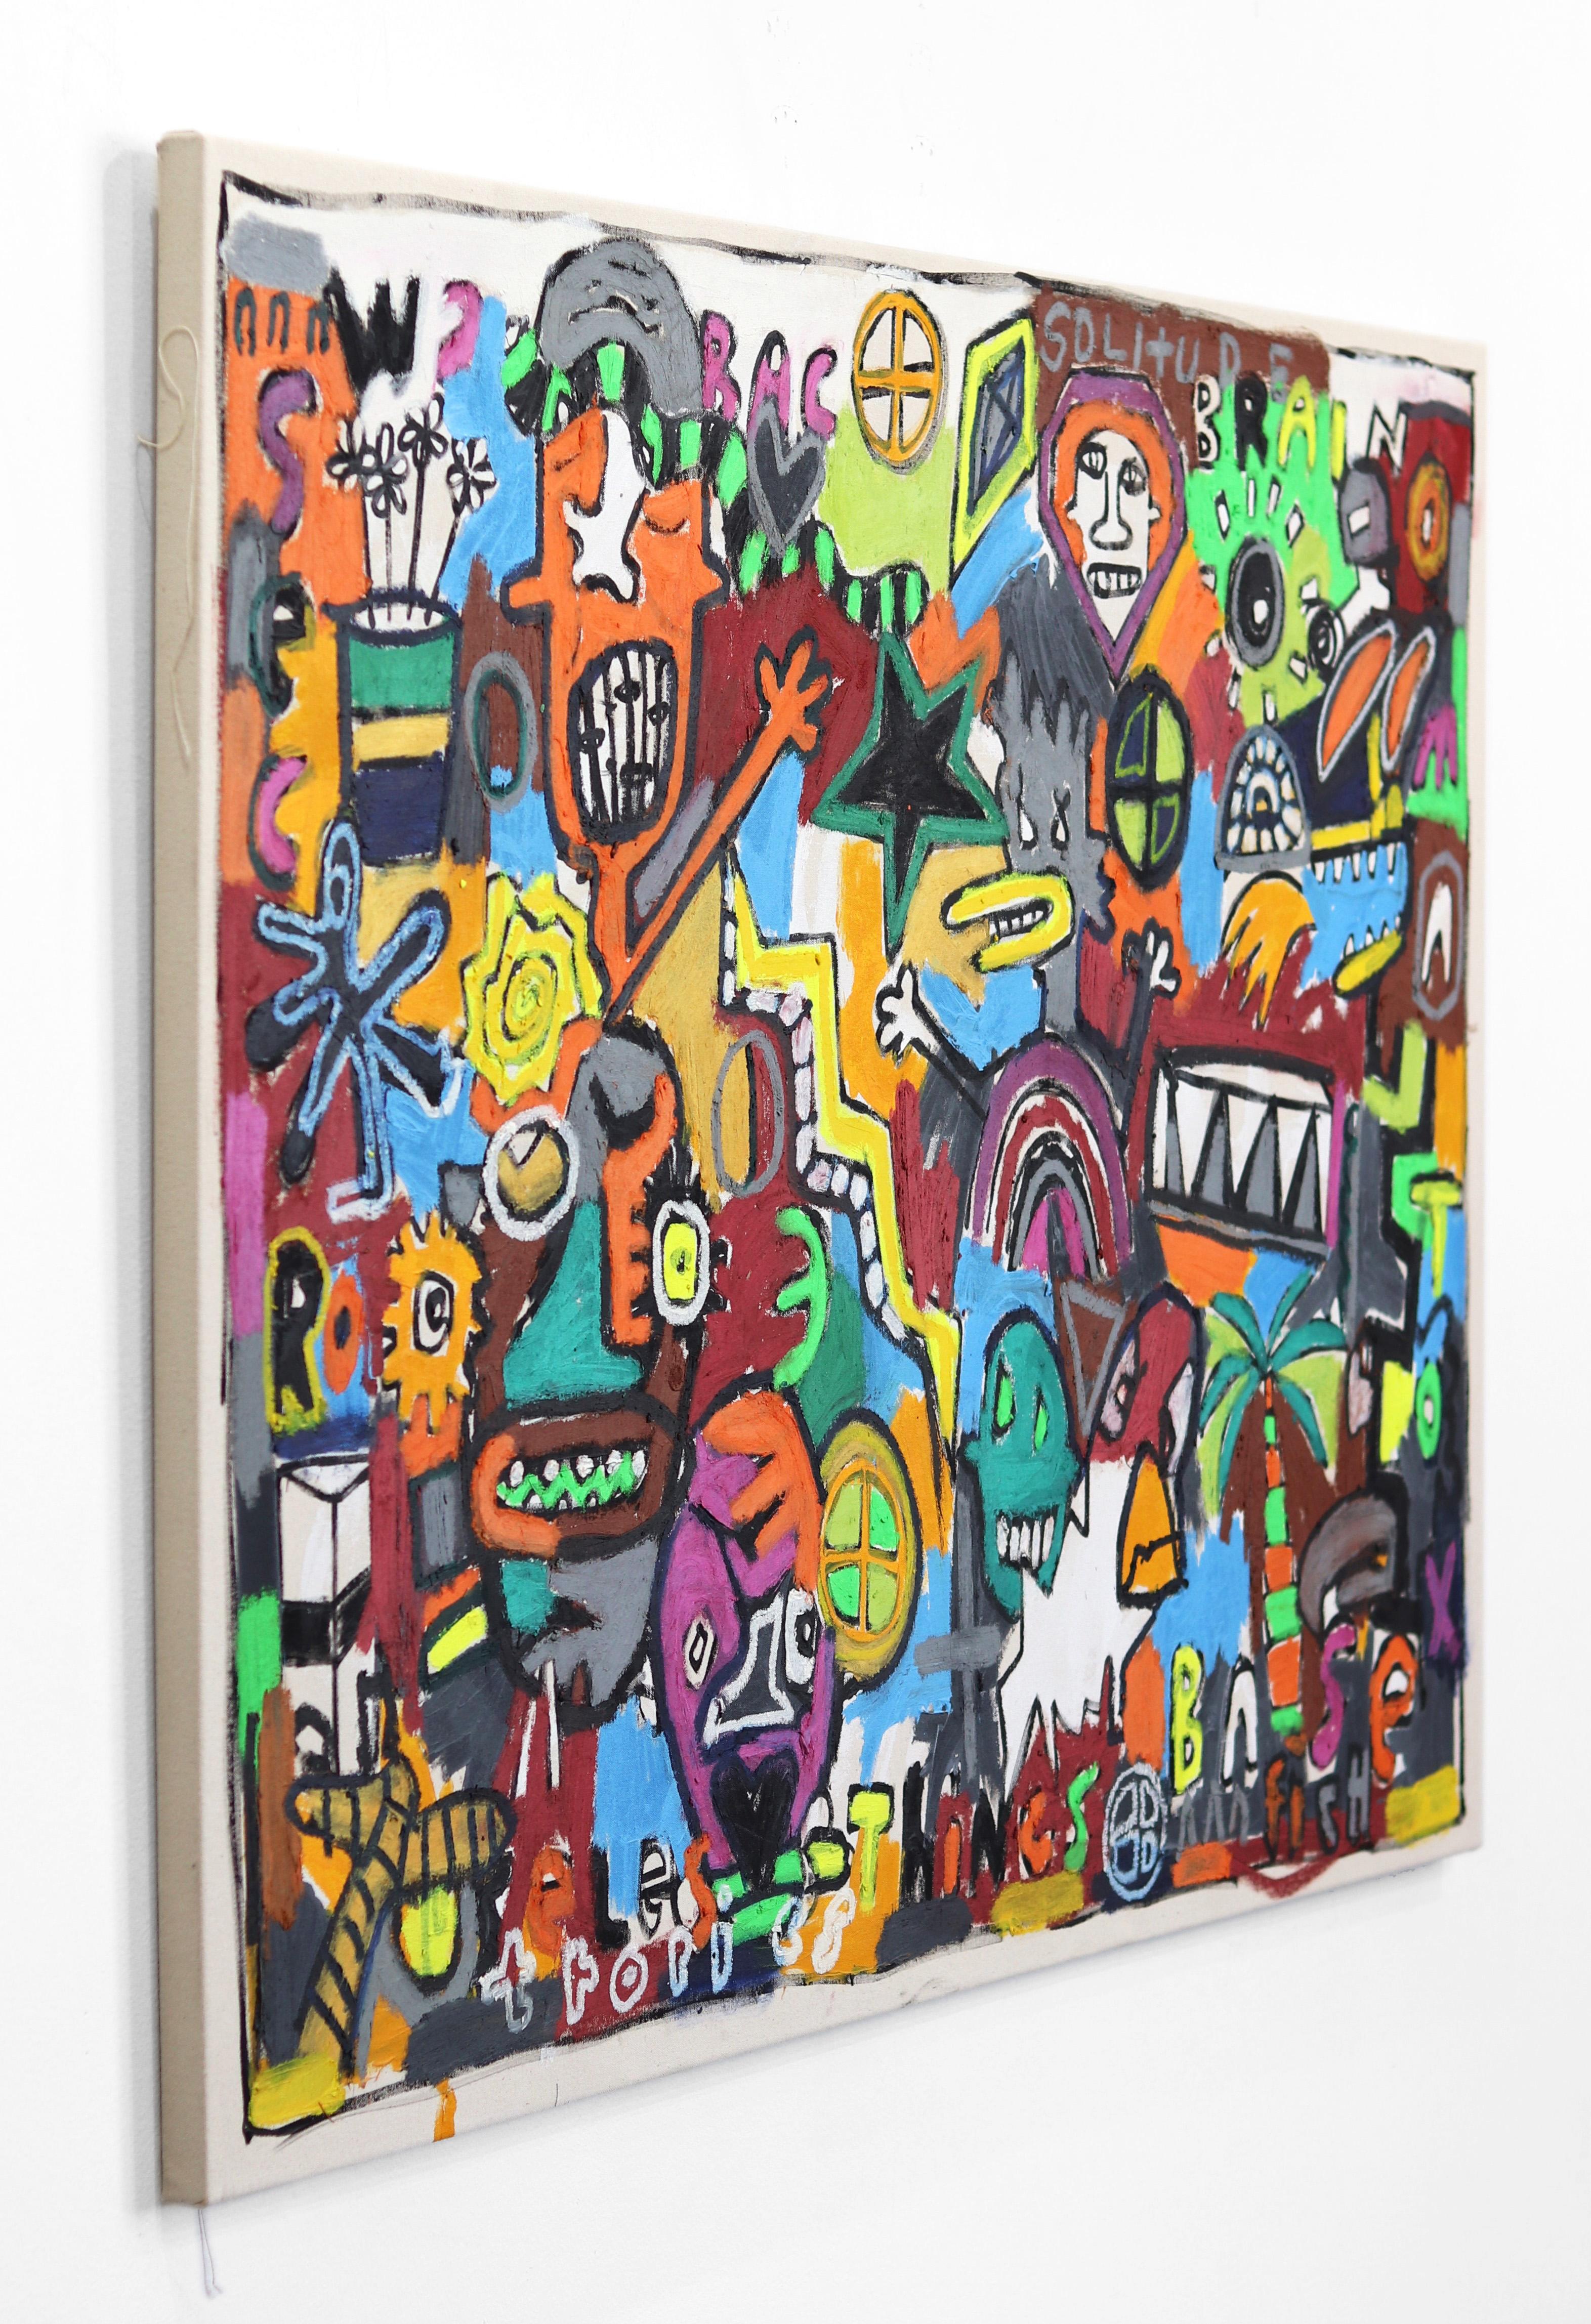 Swedish artist Jonas Fisch’s imagery is vibrantly buzzing with colorful commentary on society - past and present - morphed into figures, words, and shapes. His heavily layered canvases are the foundations of a new visual dialogue. Fisch paints with